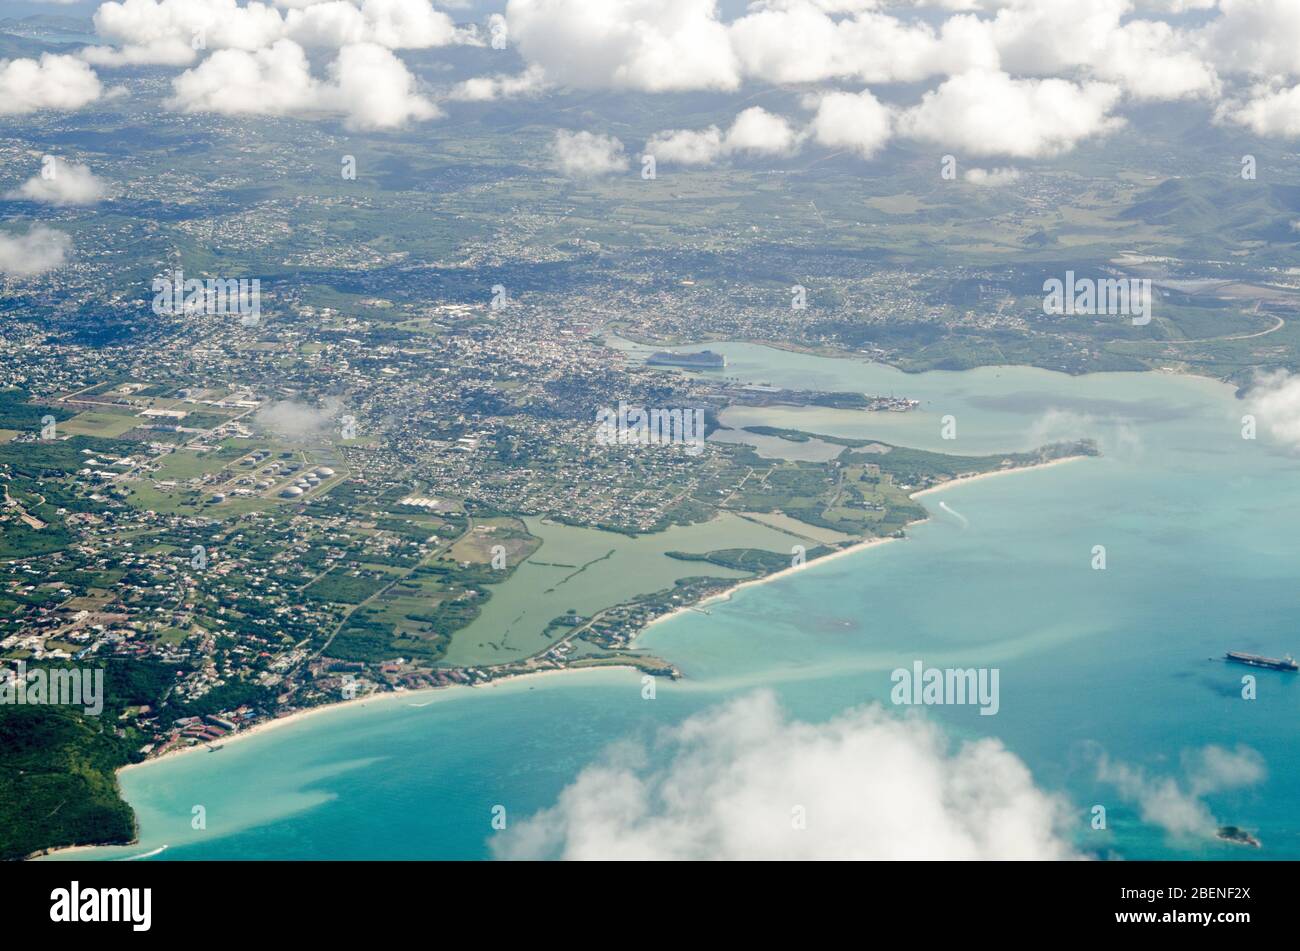 Aerial view of St John's on the Caribbean island of Antigua.  At the centre is the Cruise Port, Fort James, The Cove, Runaway Bay, Runaway Beach, McKi Stock Photo